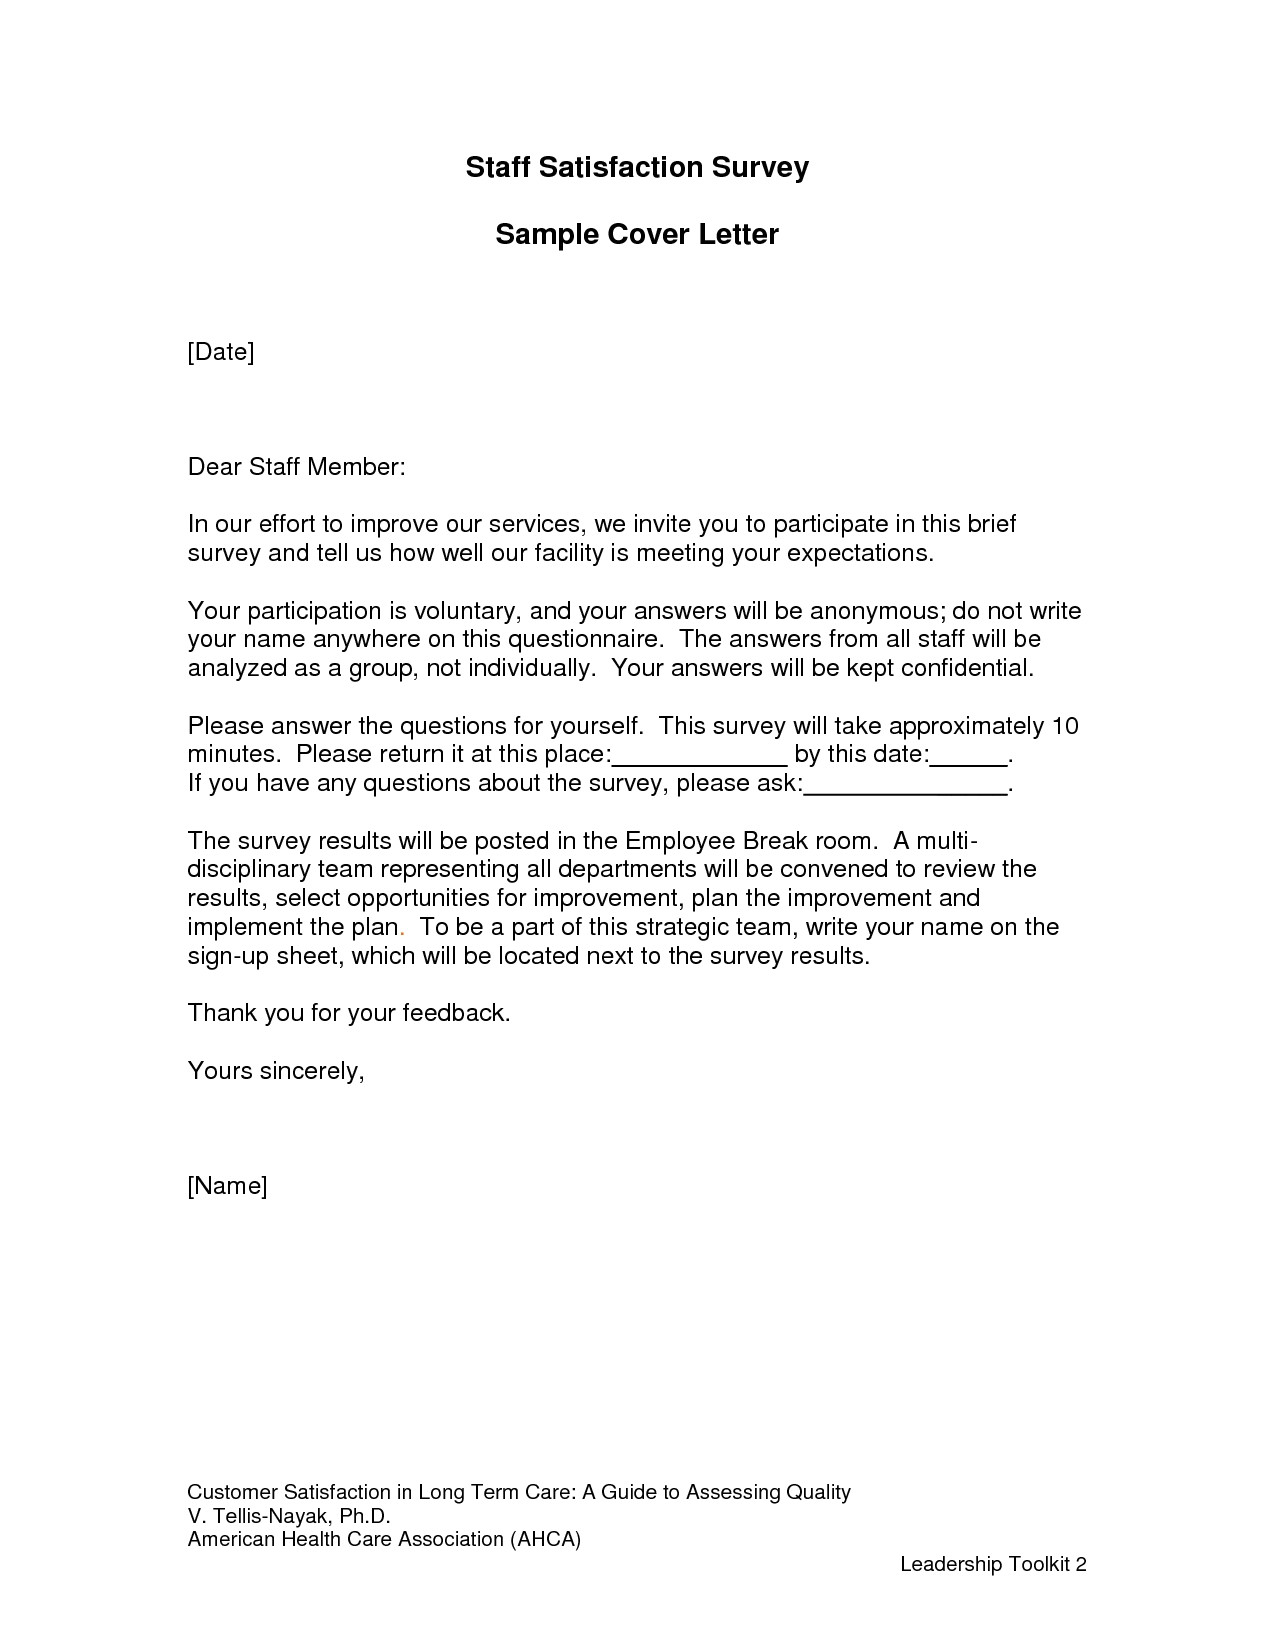 customer satisfaction survey cover letter